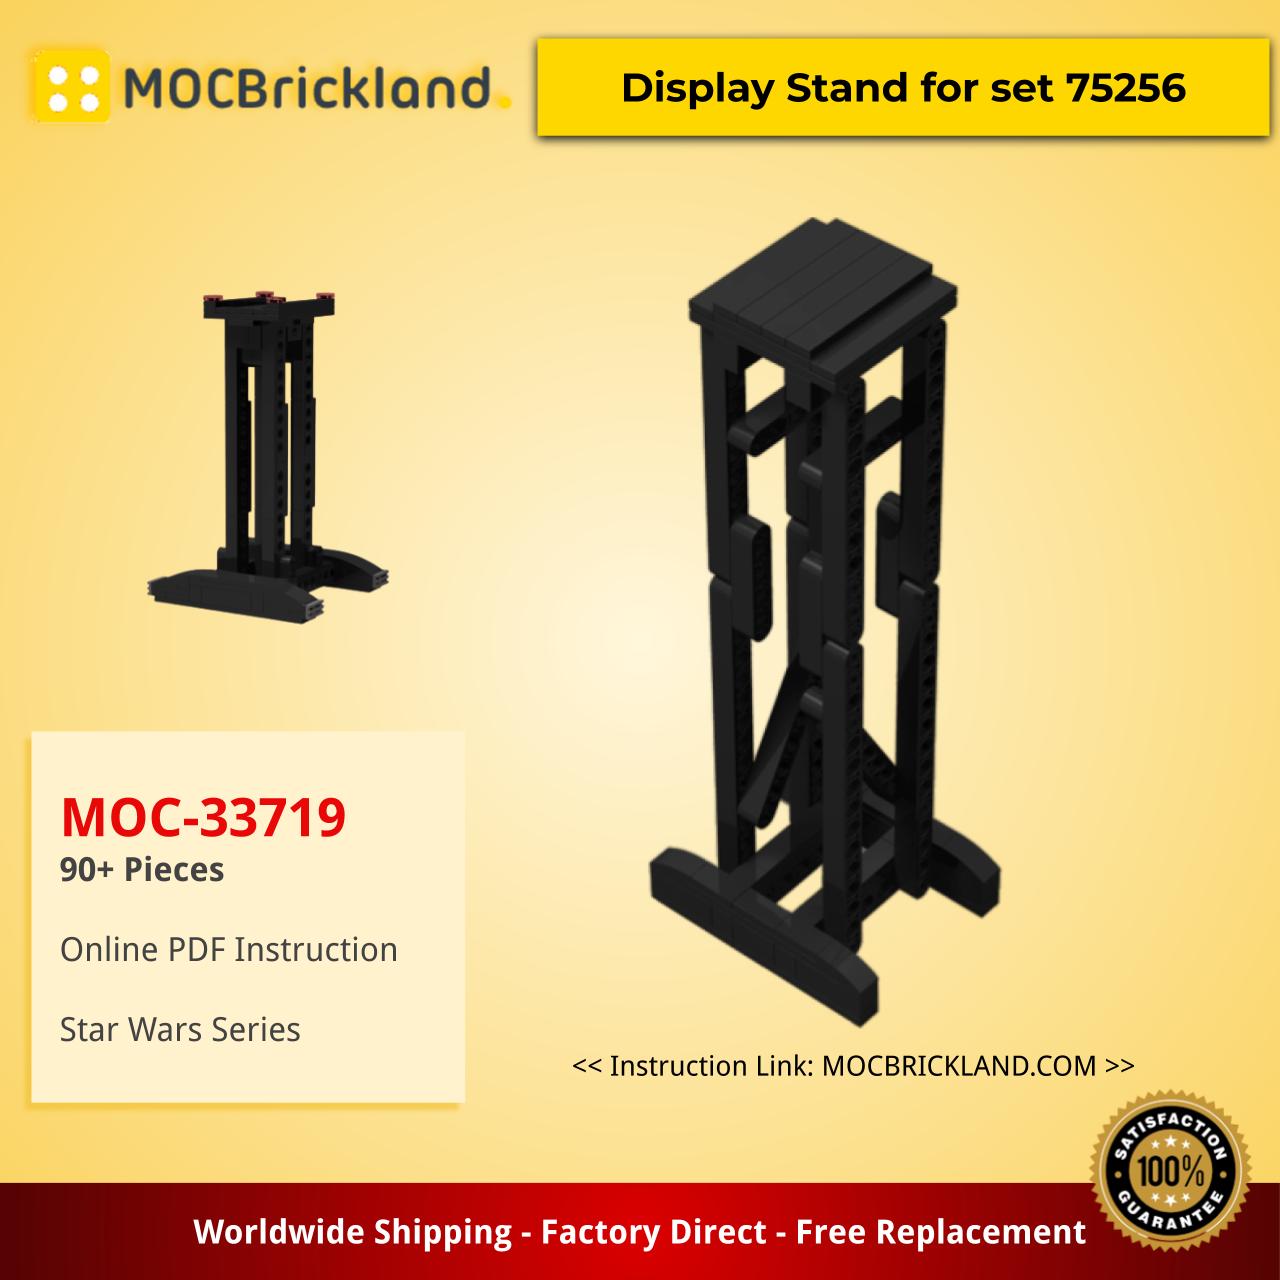 Star Wars MOC-33719 Display Stand for set 75256 by Klockowy_pasjonat MOCBRICKLAND